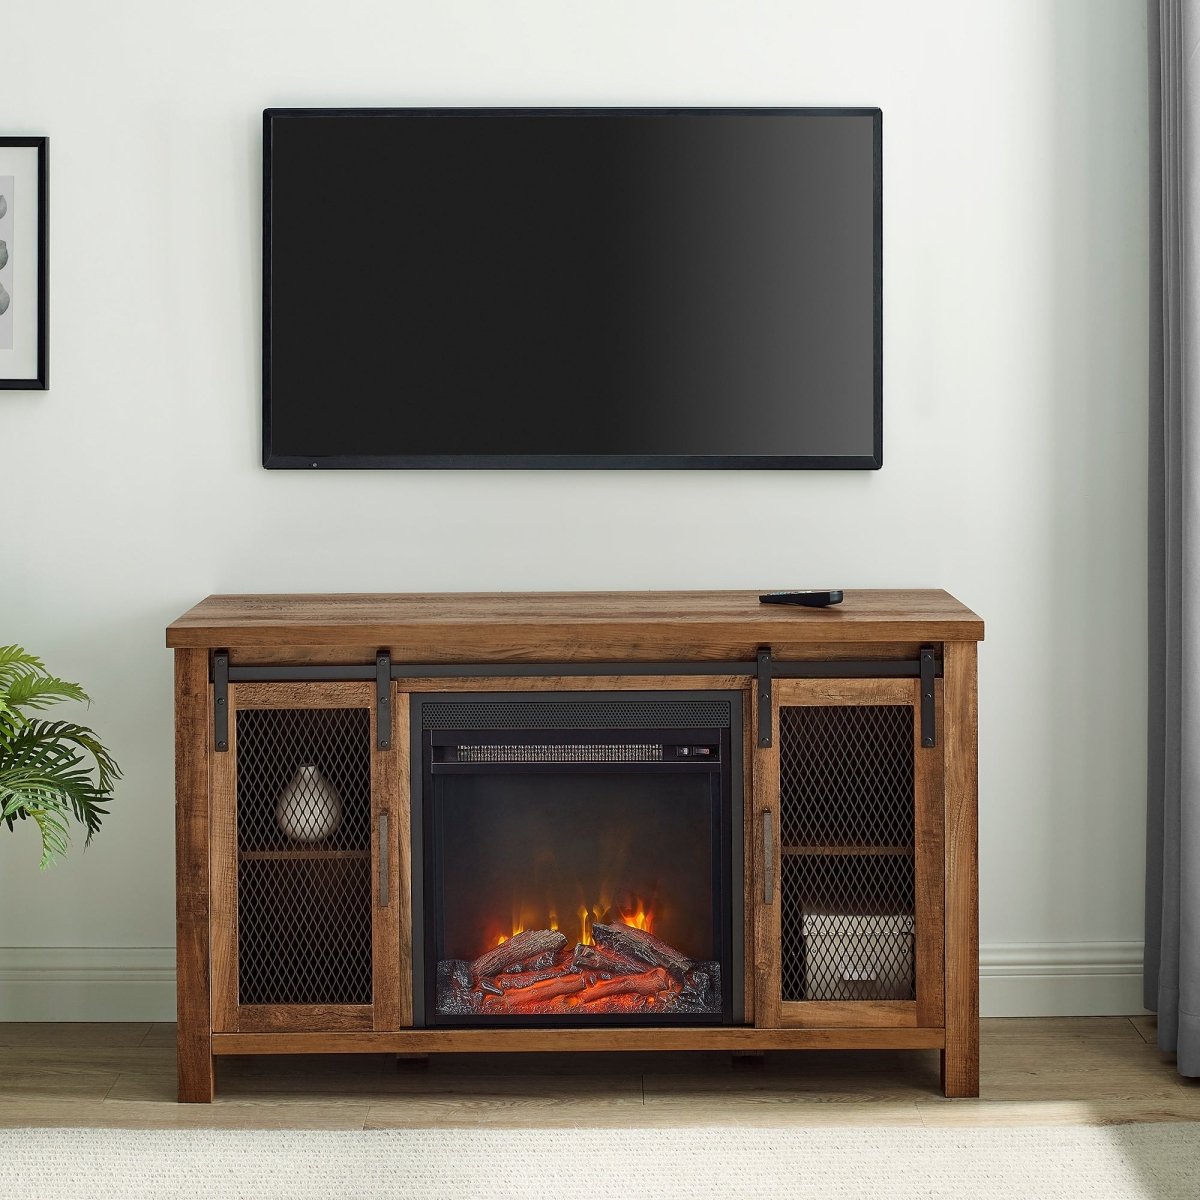 Walker Edison Grant 48" Rustic Farmhouse Fireplace TV Stand - lily & onyx